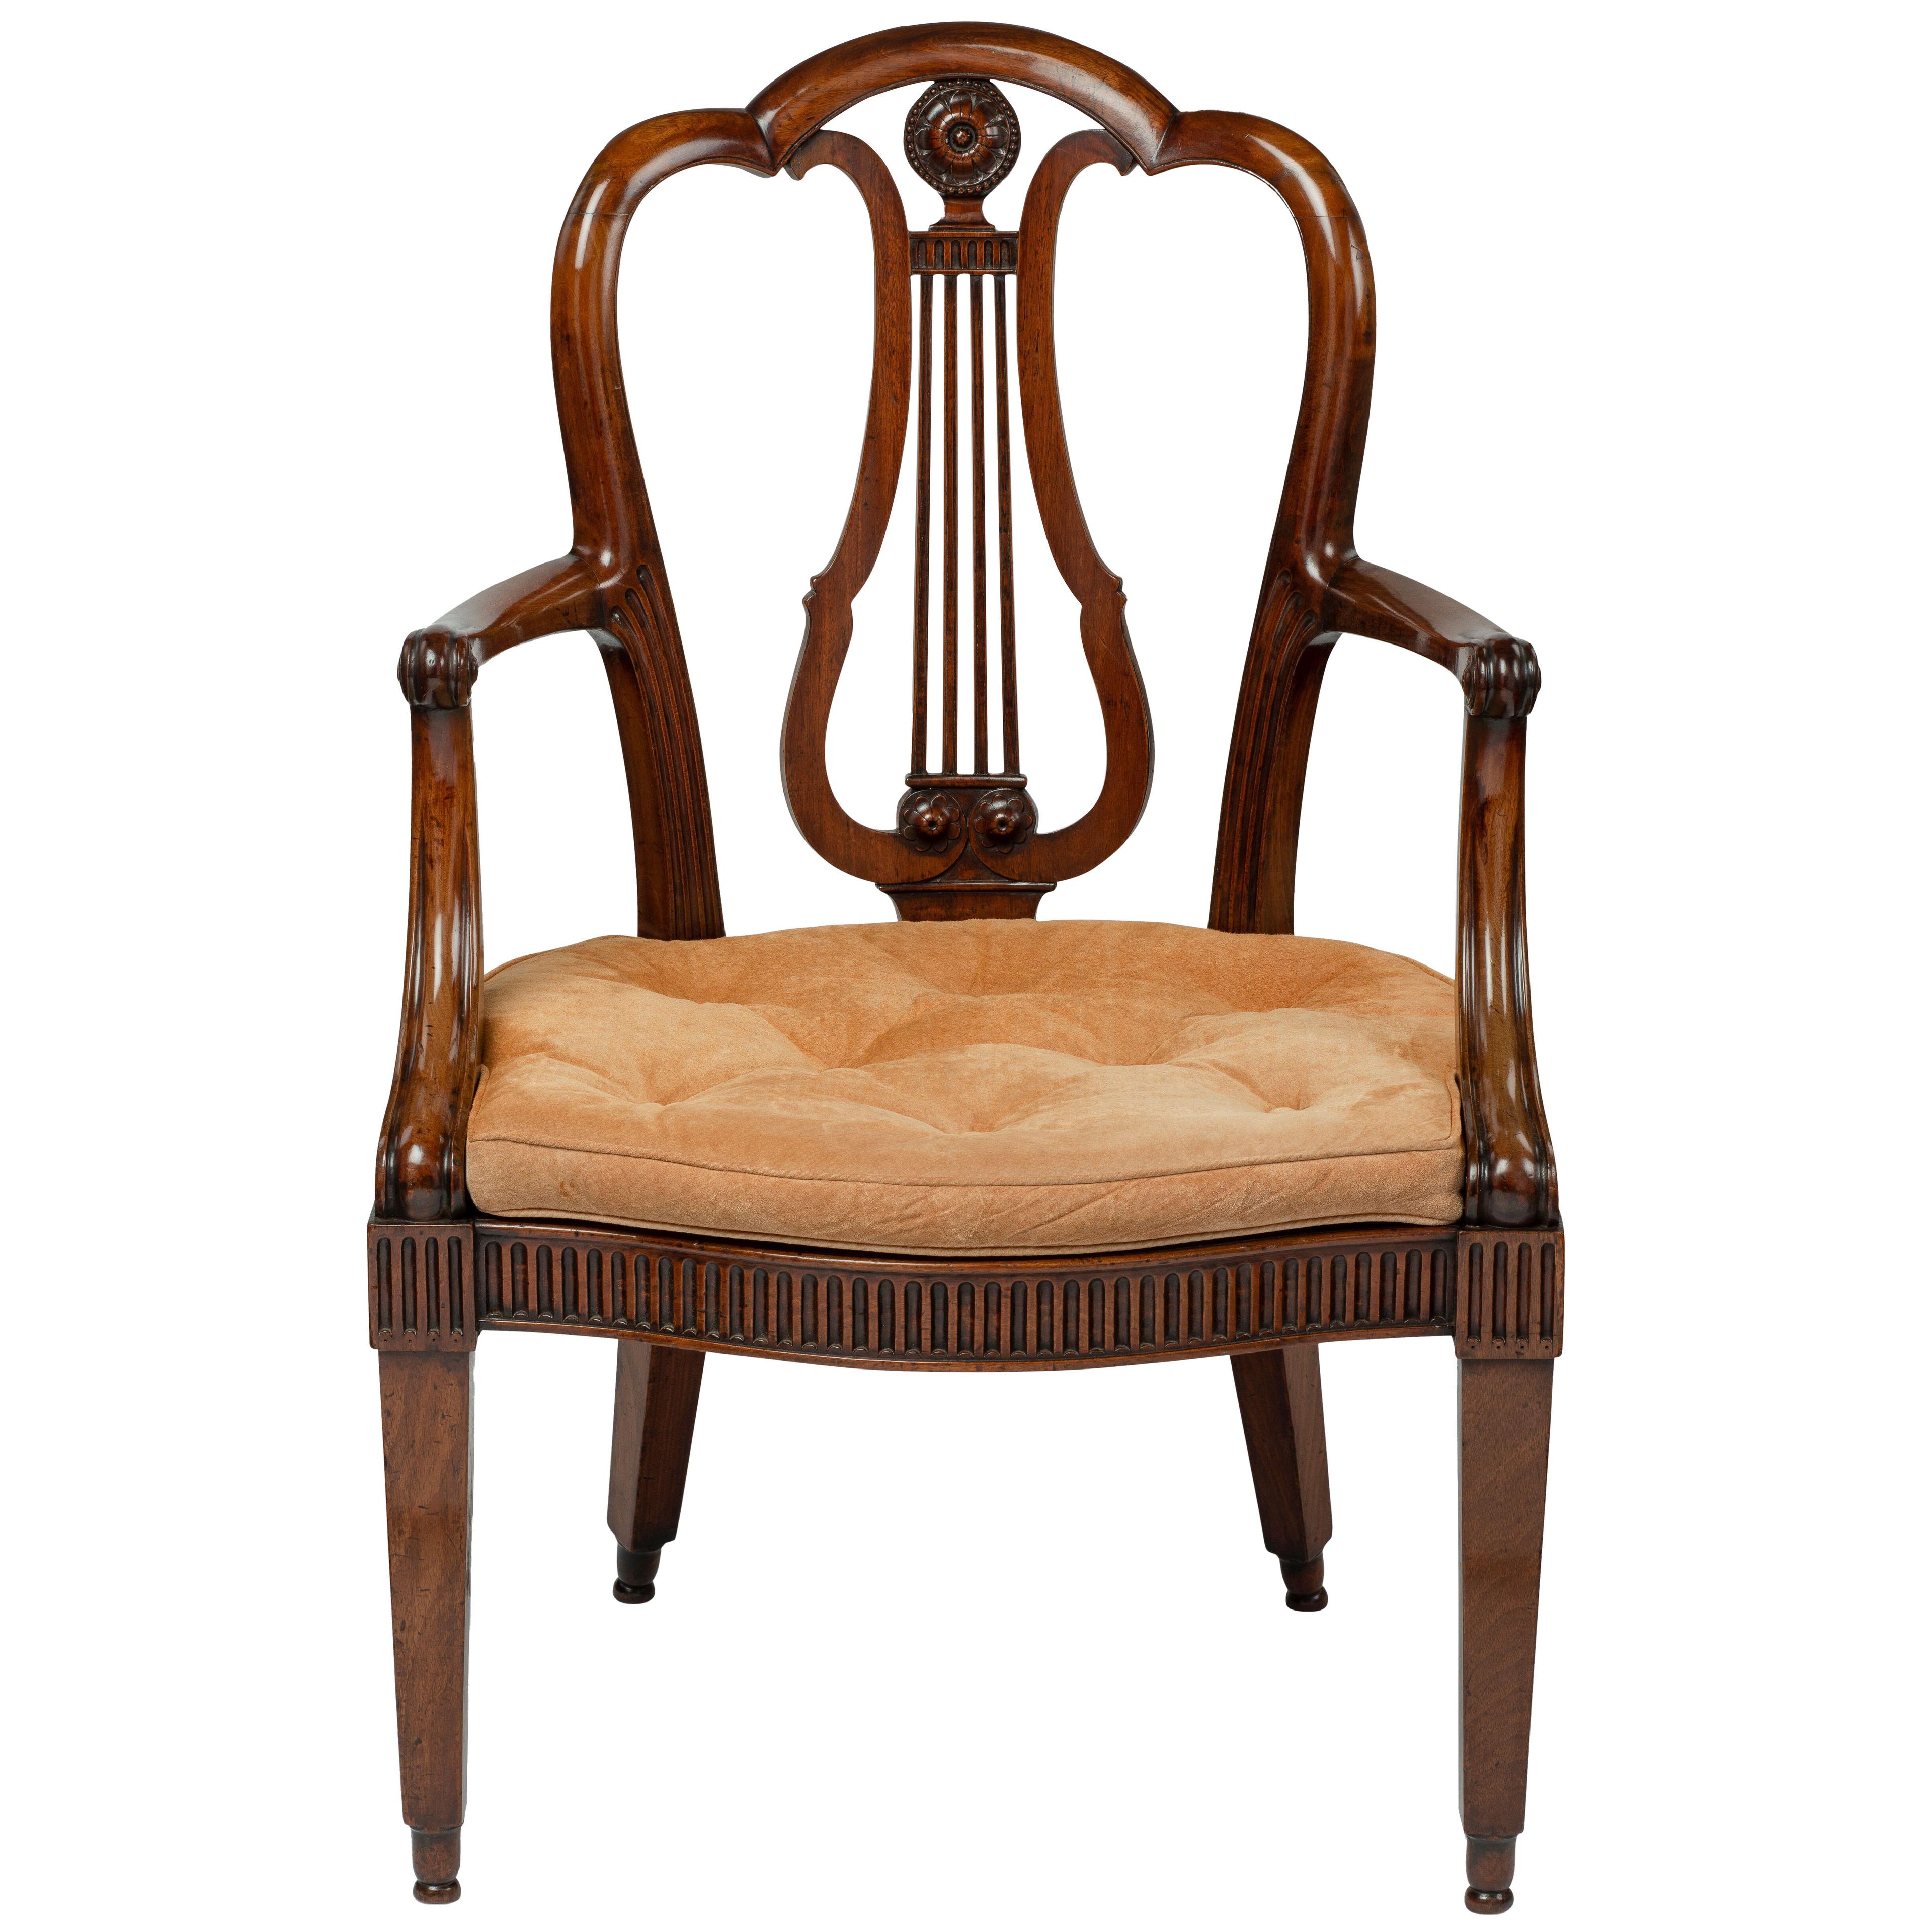 George III Carved Mahogany Armchair possibly by Linnell or Chippendale